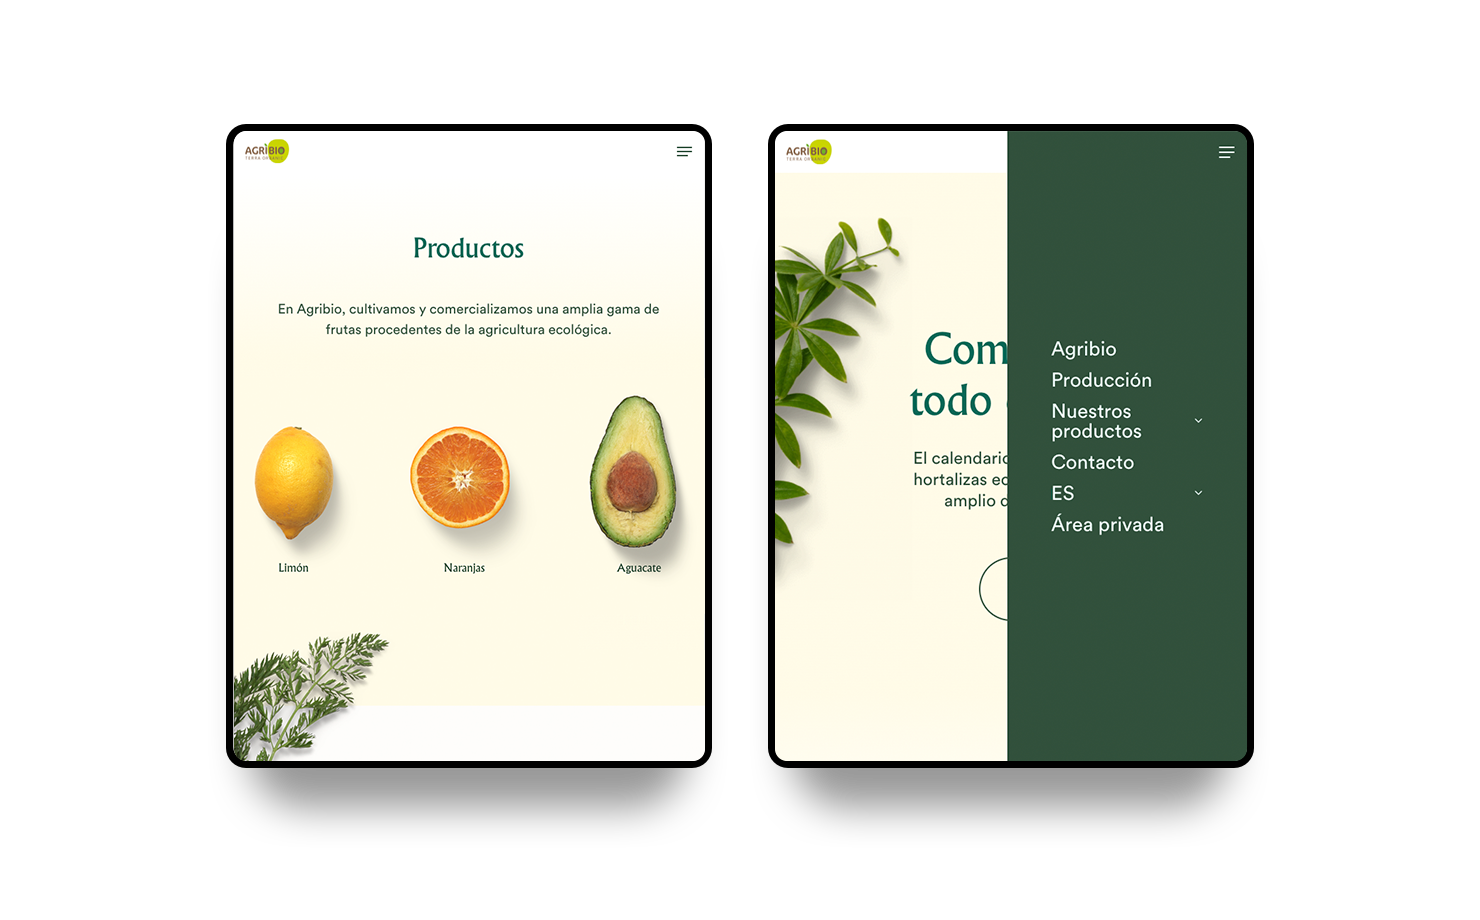 Agribio, a website committed to agroecology and the environment